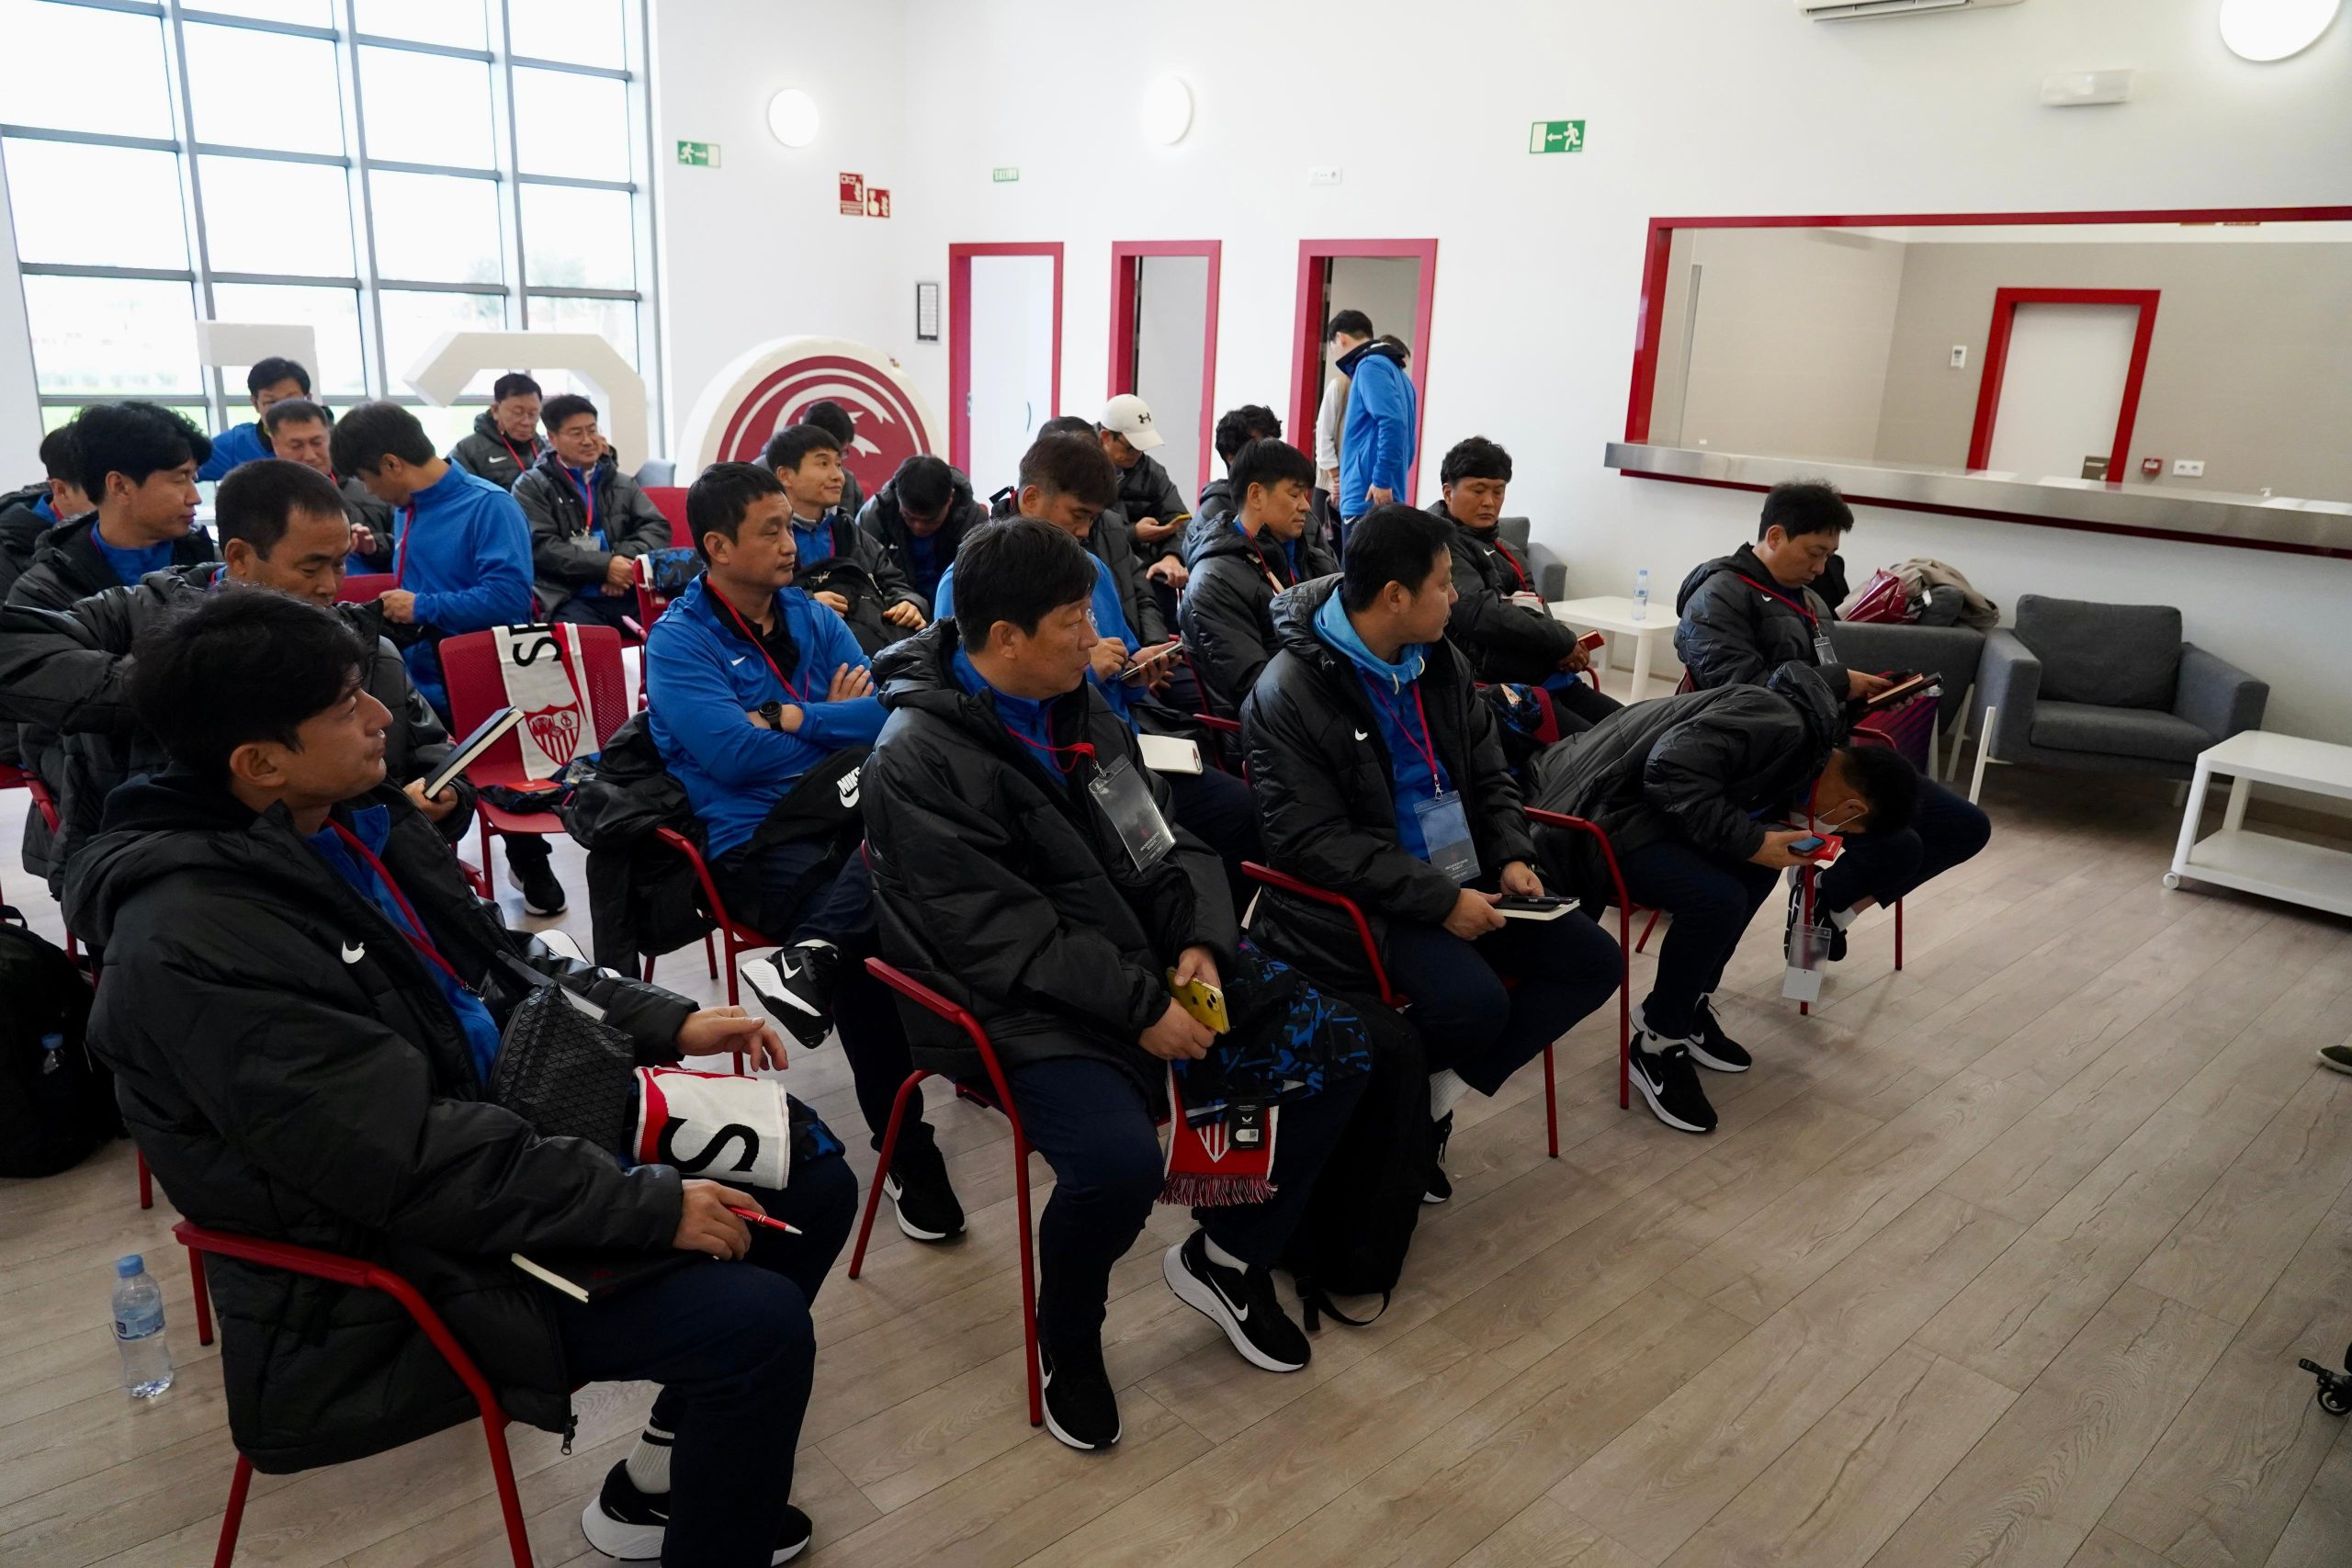 More than 25 KFA Coaches complete training programme at Sevilla FC Coaches Academy